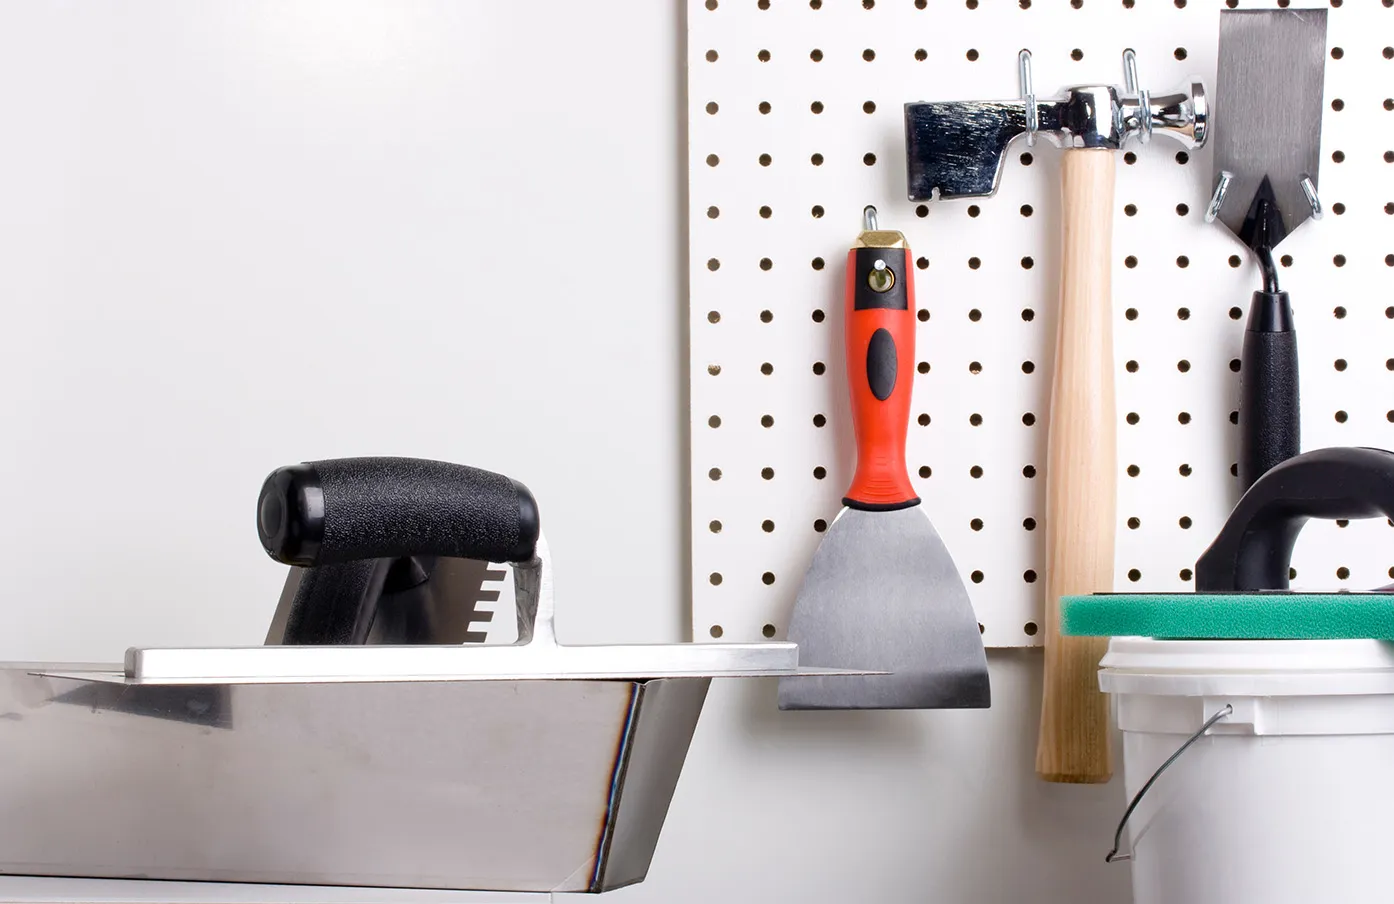 Plastering tools on a white corkboard